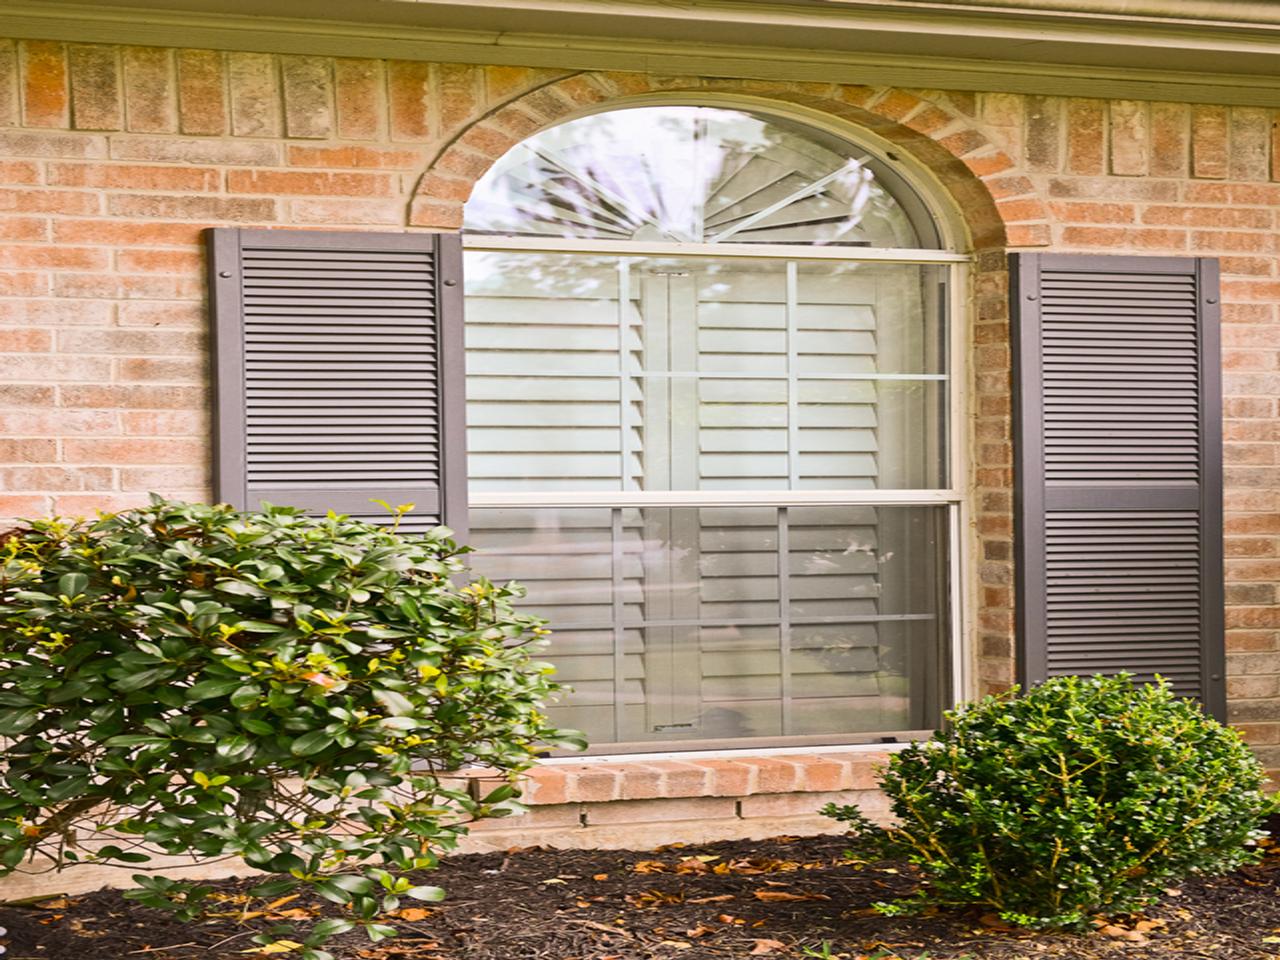 Exterior view of plantation shutters and louvered shutters on a brick house